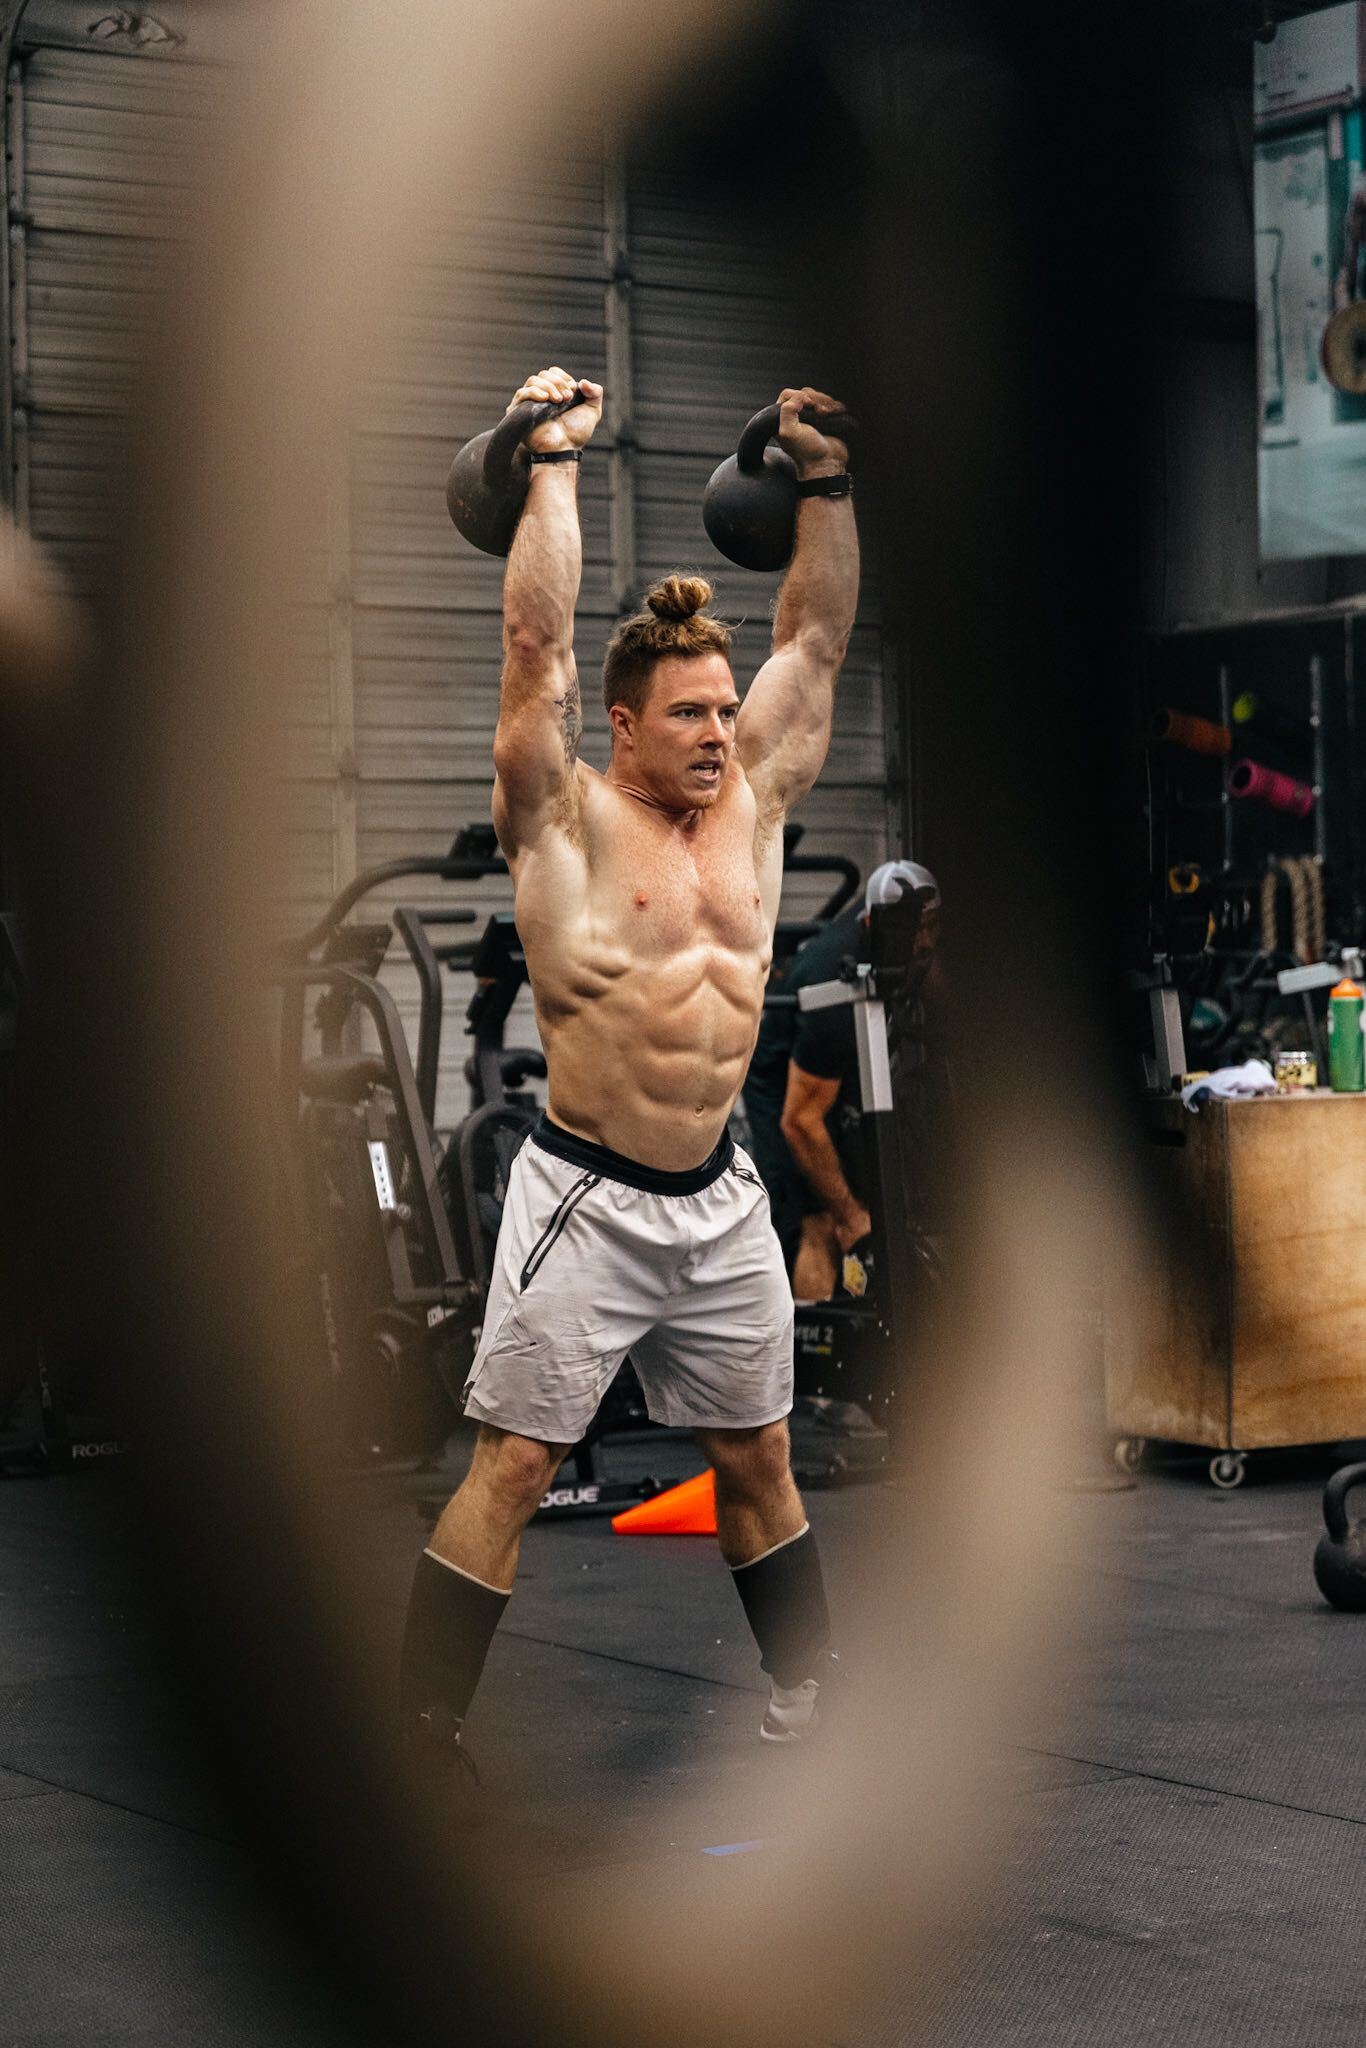 Who Is the Fittest Gymshark Athlete?